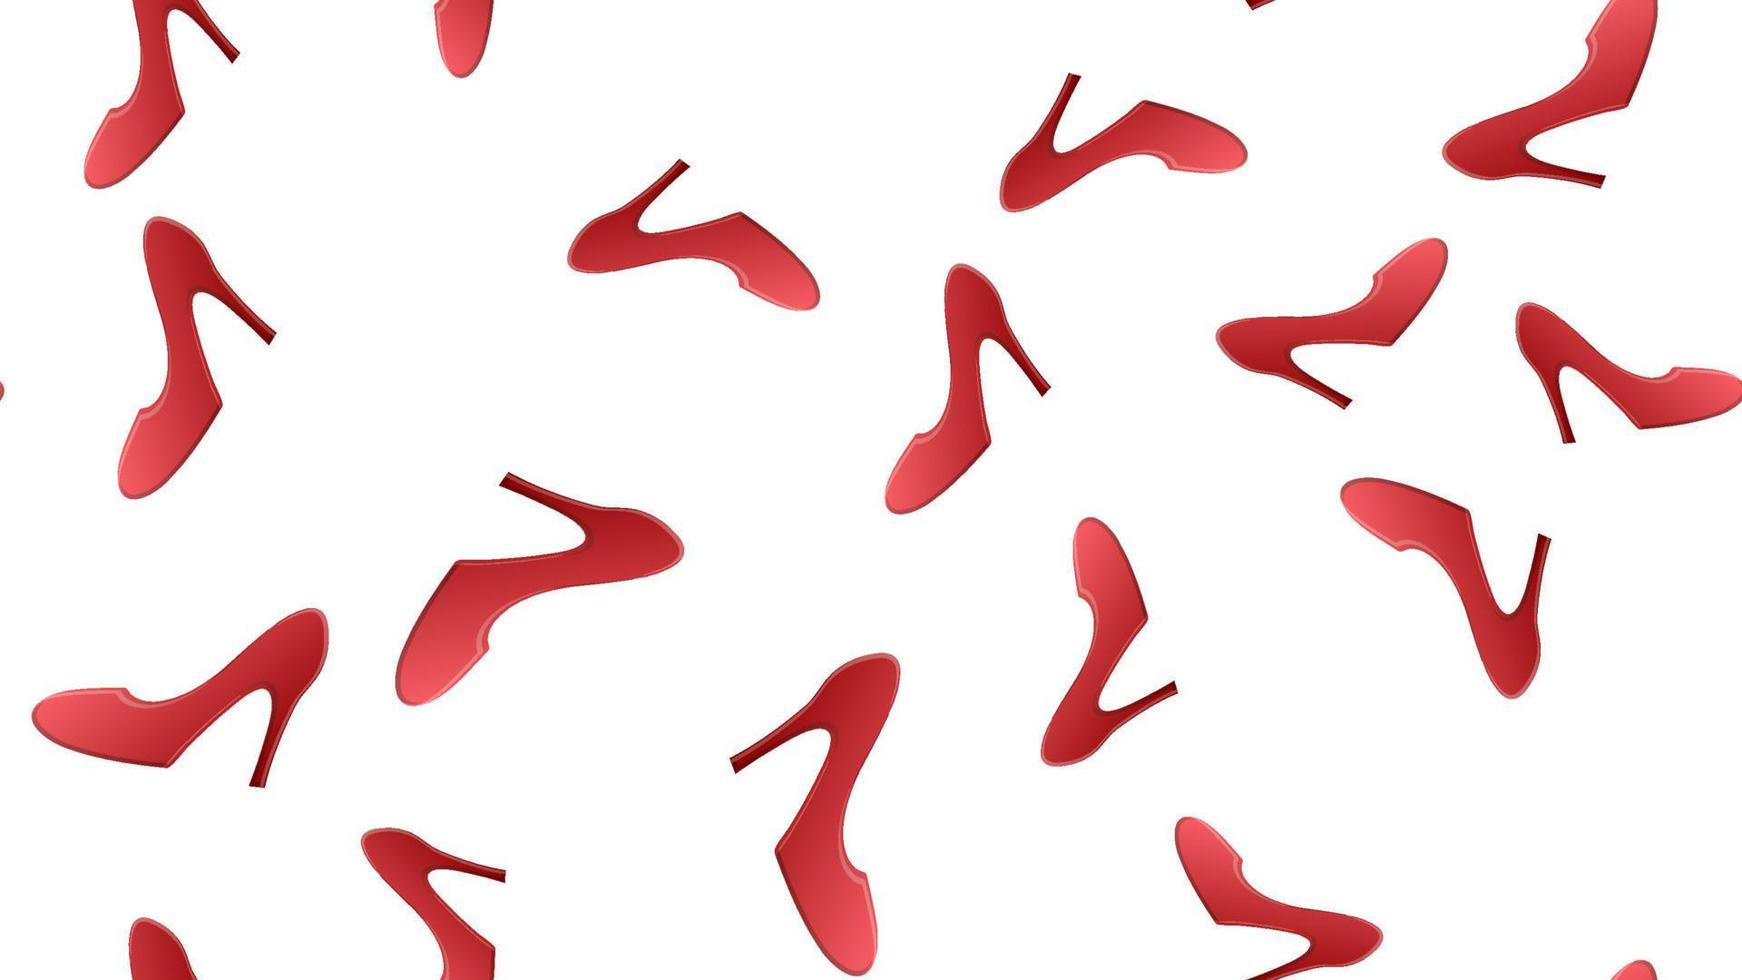 Realistic Detailed 3d Woman High Heel Red Shoes Seamless Pattern Background on a White Elegant Style Concept. Vector illustration of Sexy Female Footwear